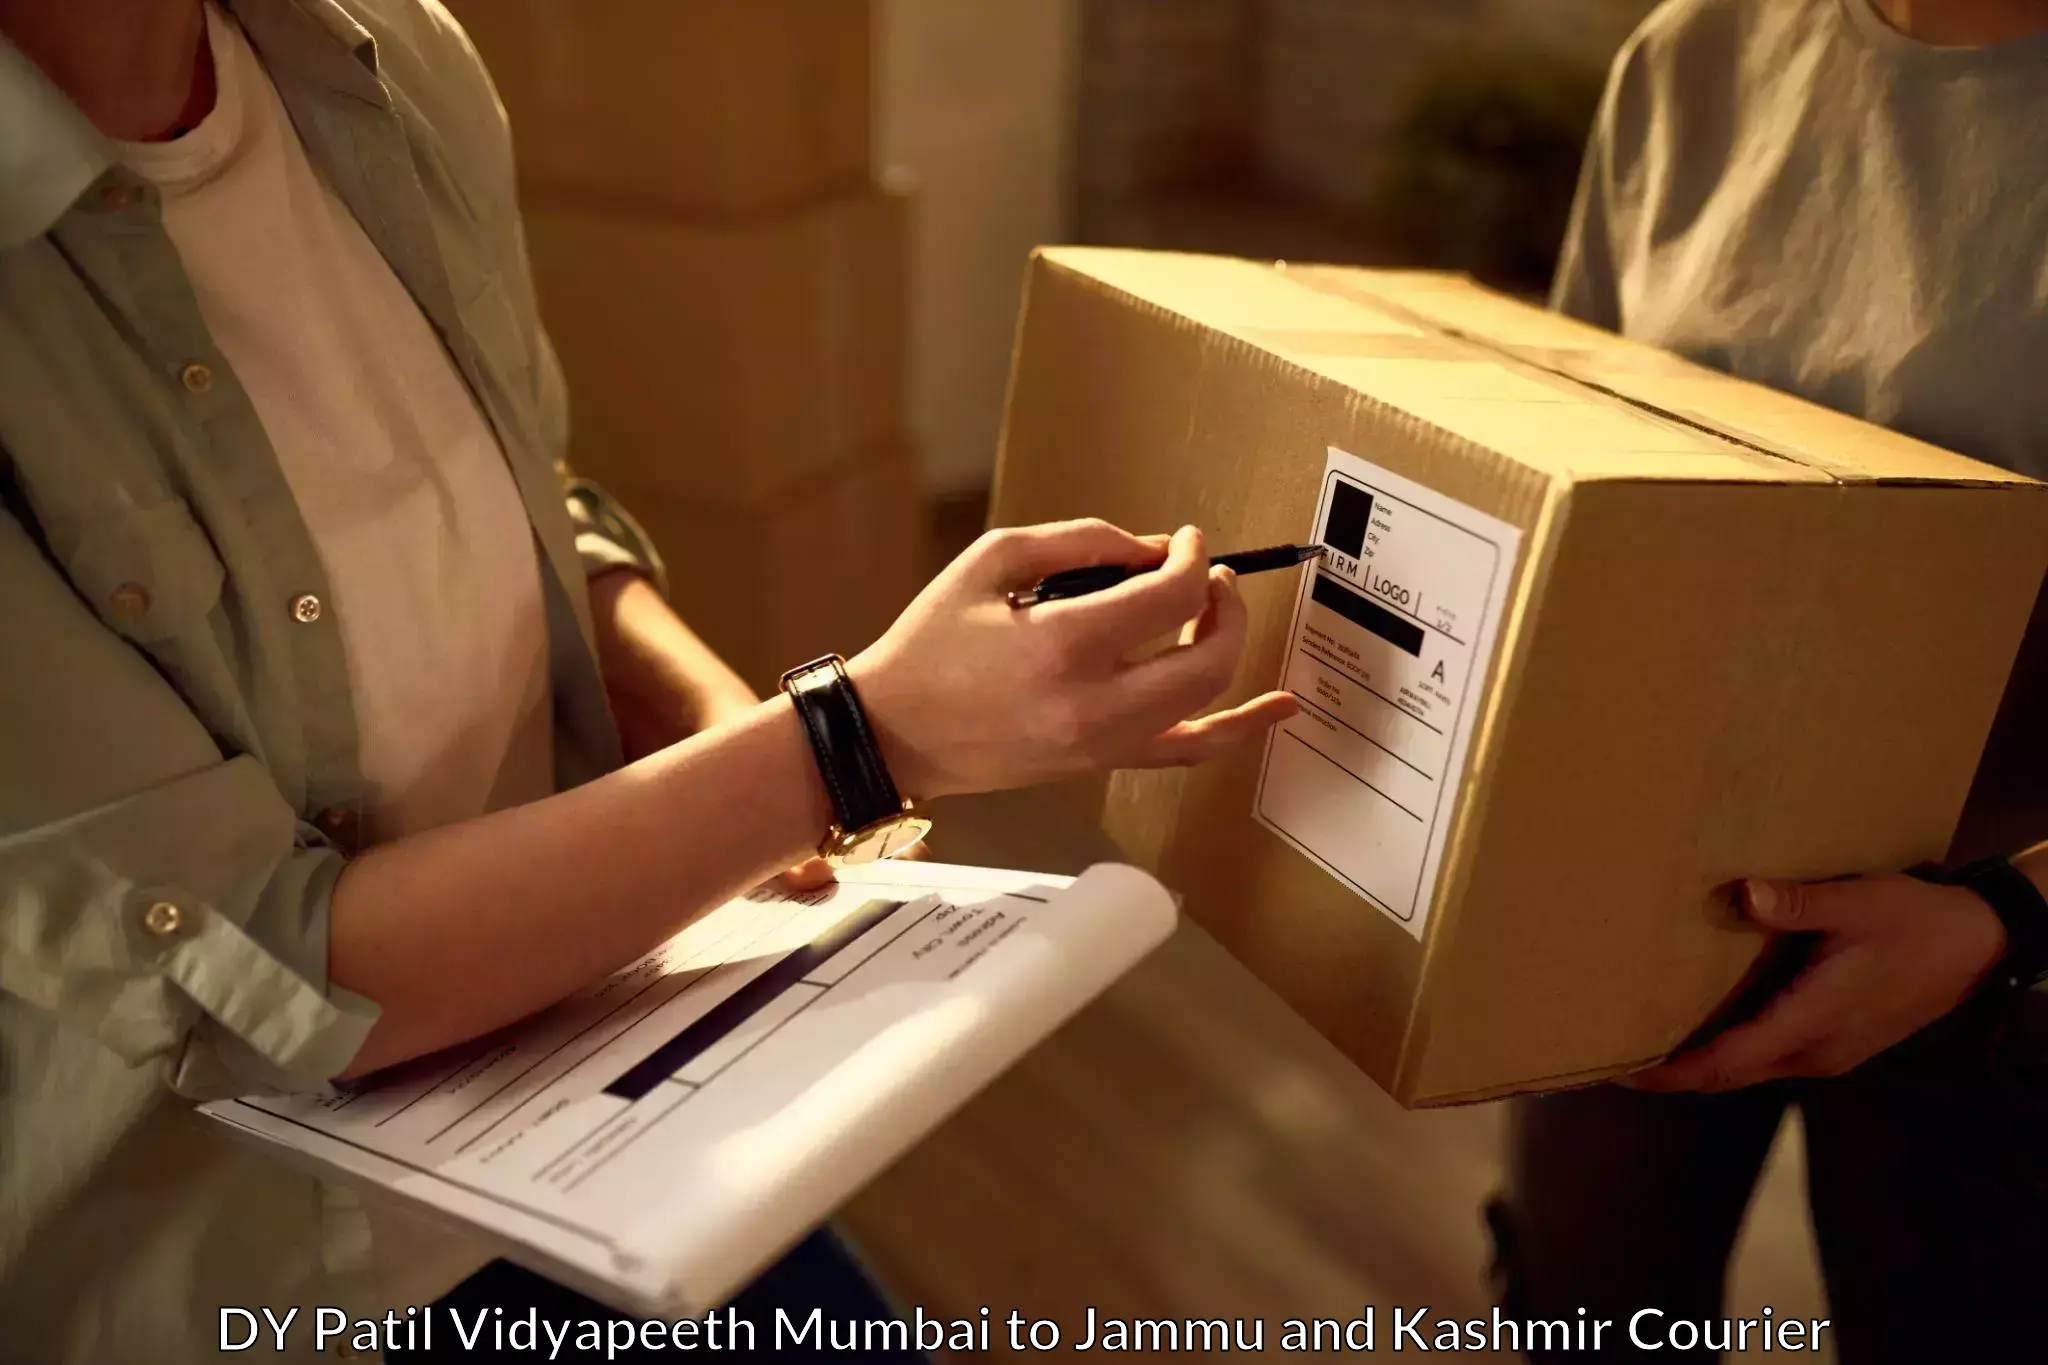 24-hour courier services DY Patil Vidyapeeth Mumbai to Jammu and Kashmir